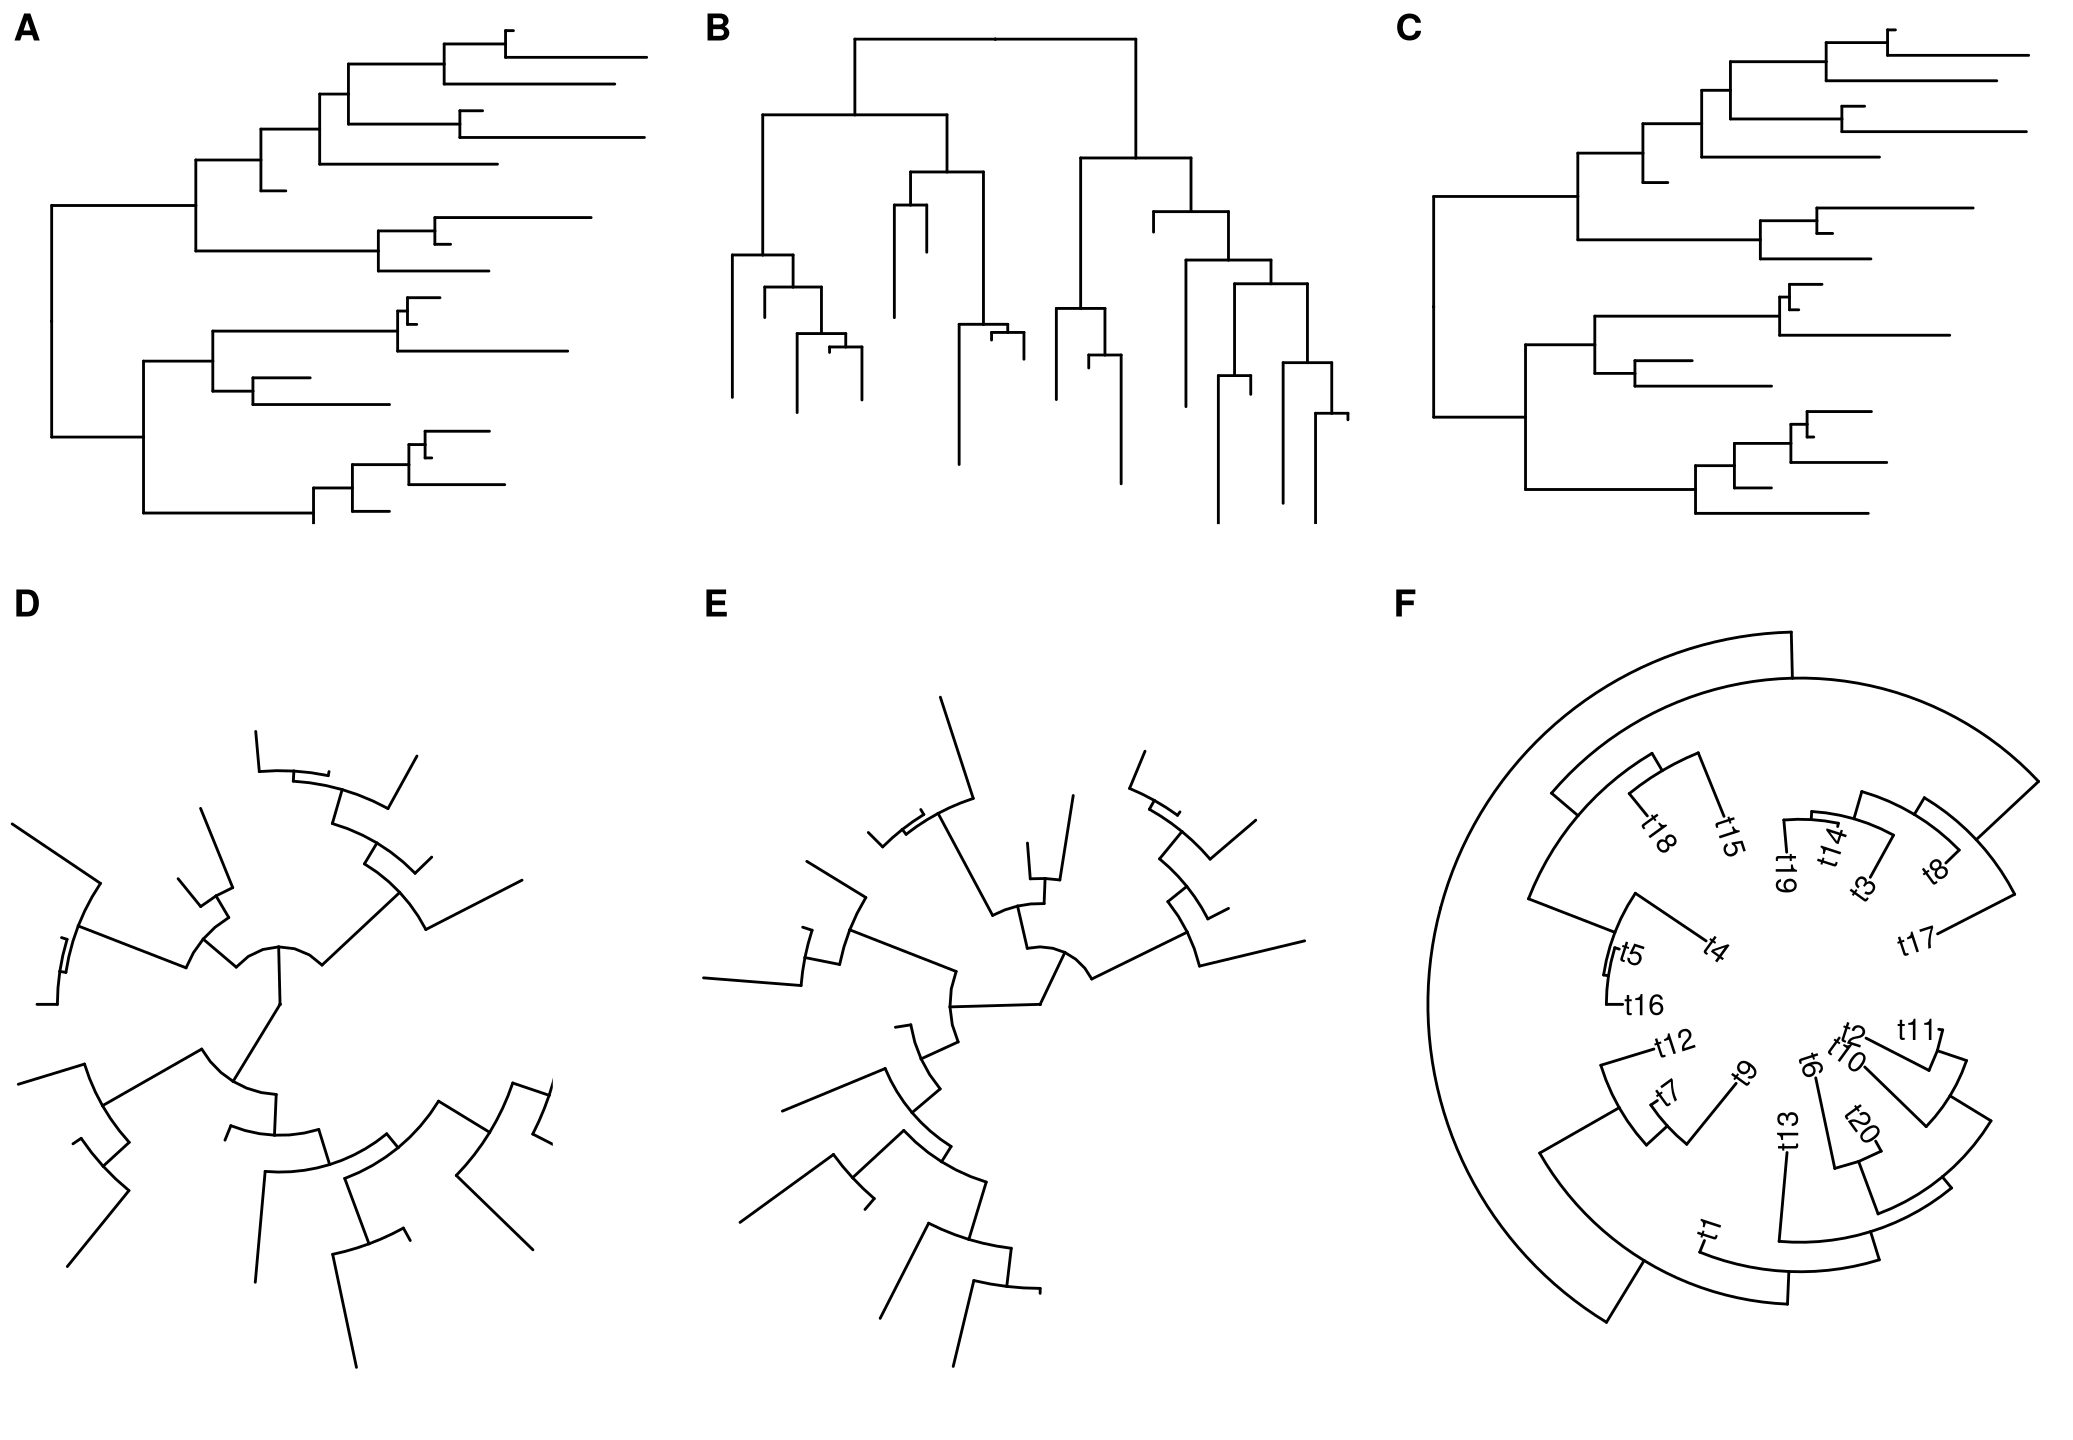 Layout layers for transforming among different layouts. Default rectangular layout (A); transform rectangular to dendrogram layout (B); transform circular to rectangular layout (C); transform rectangular to circular layout (D); transform rectangular to fan layout (E); transform rectangular to inward circular layout (F).